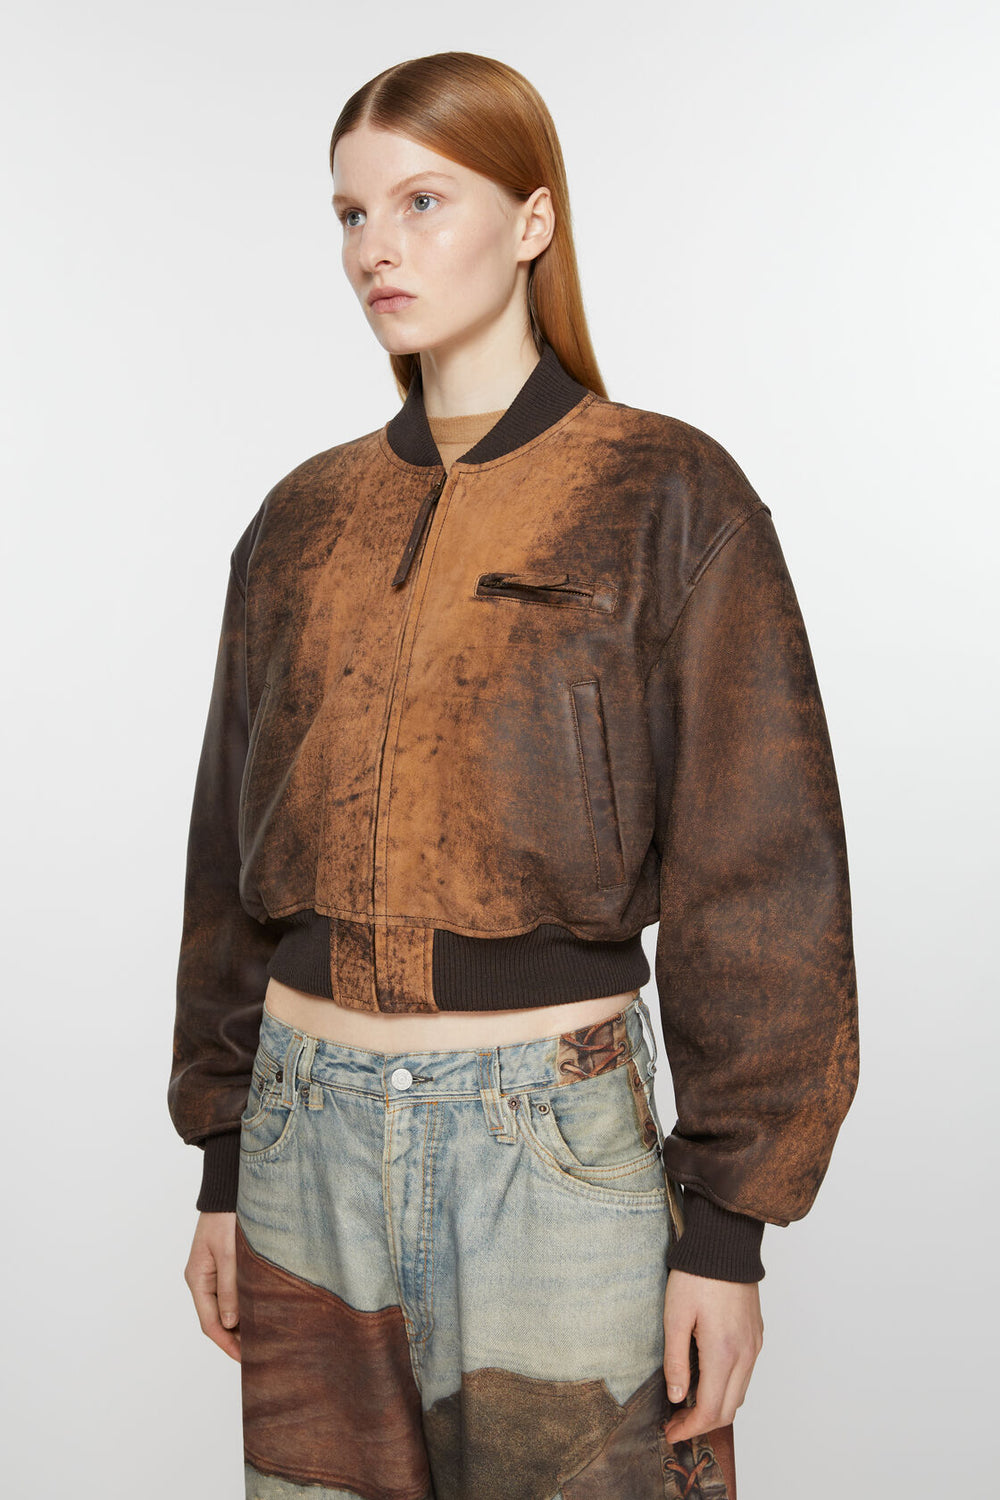 ACNE STUDIOS - Leather Bomber Jacket Brown - Dale